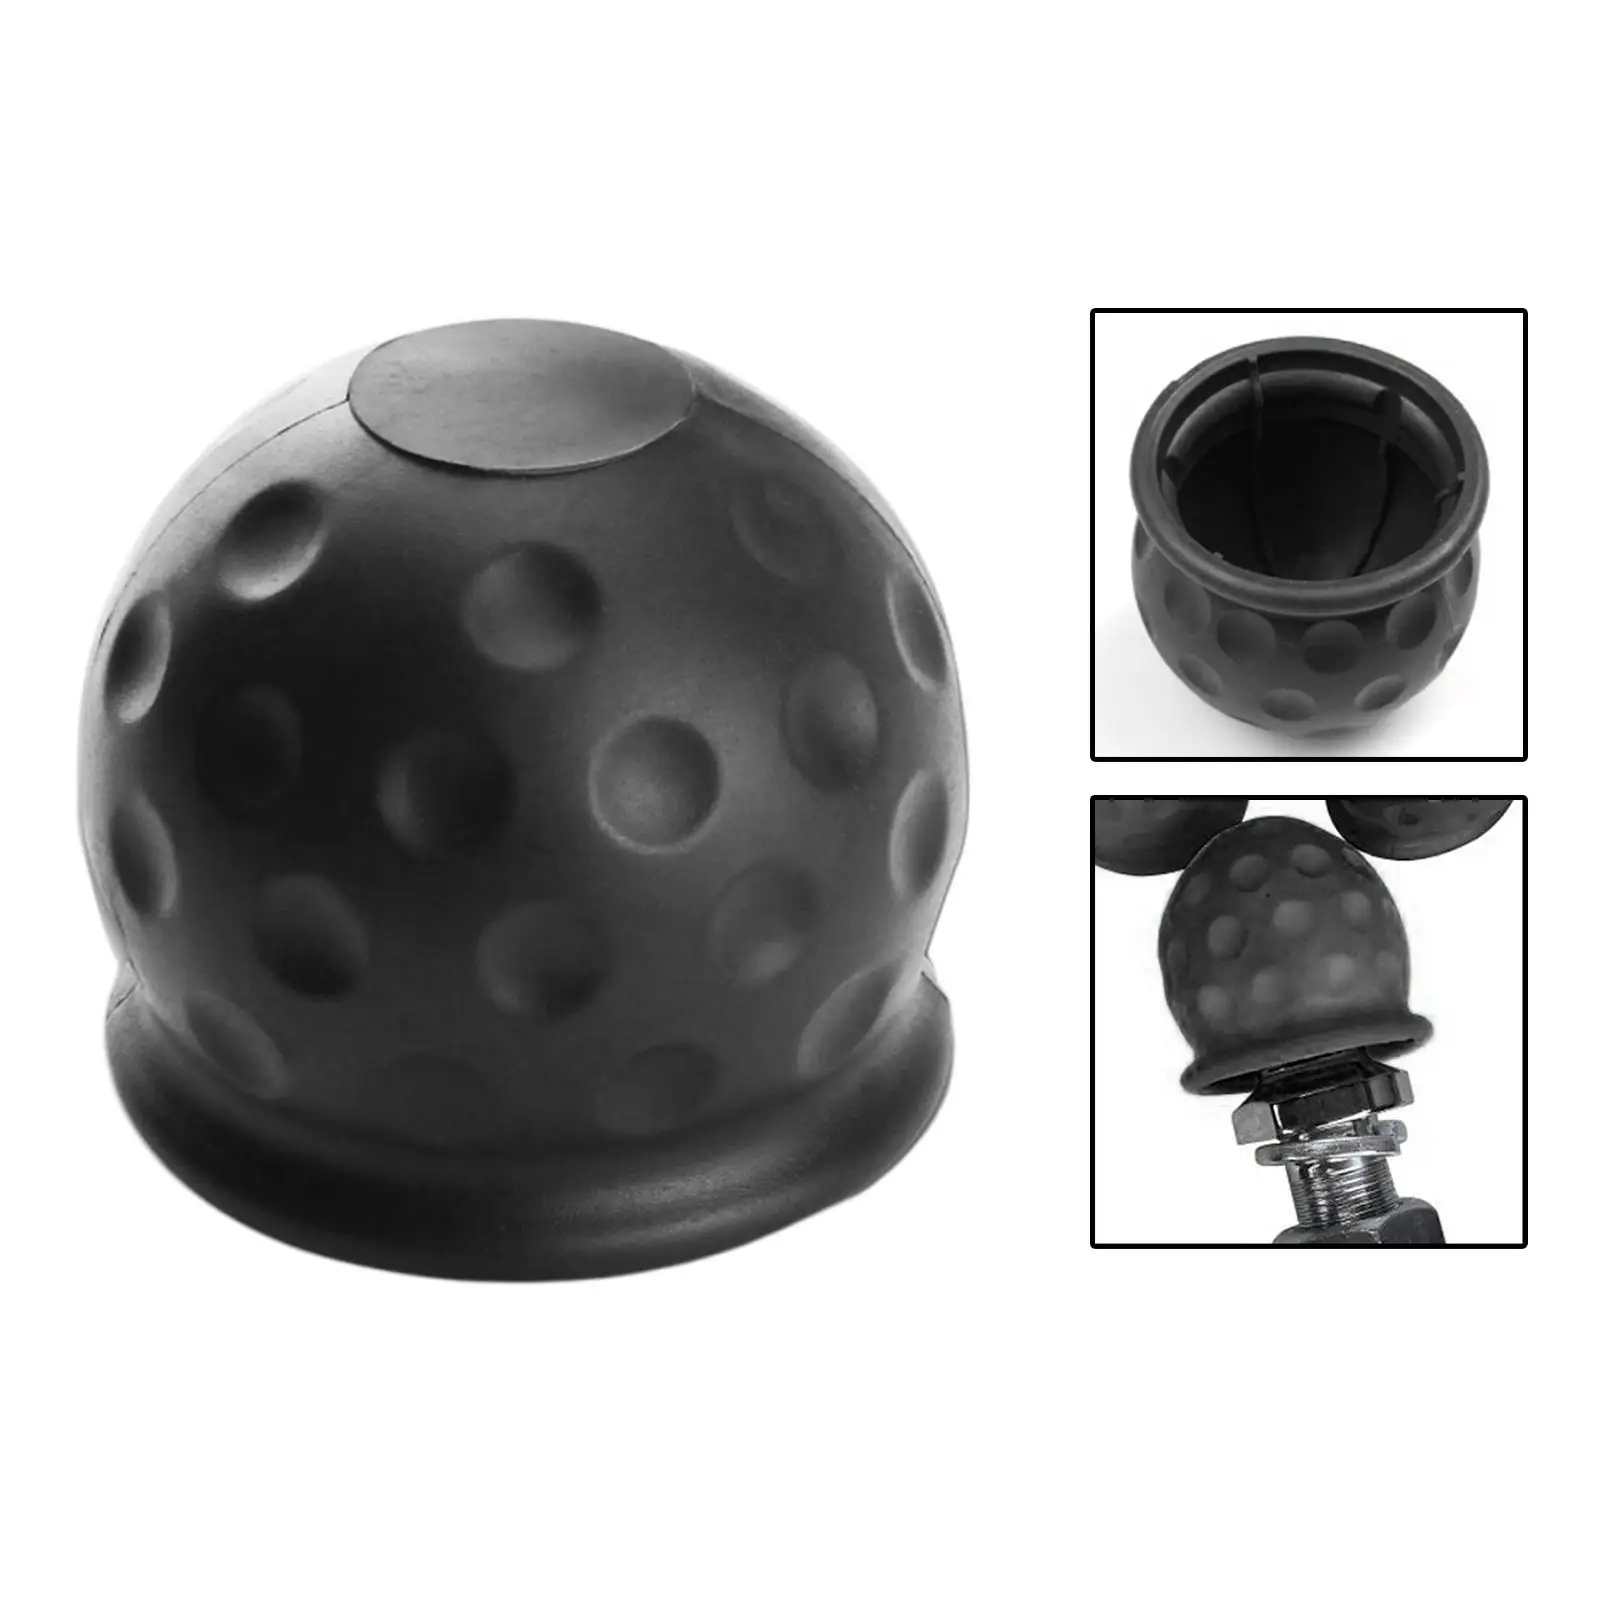 Trailer Hitch Ball Cover for RV Trailer No Tools or Hardware Required Easy to Install High Performance Premium Durable Dustproof